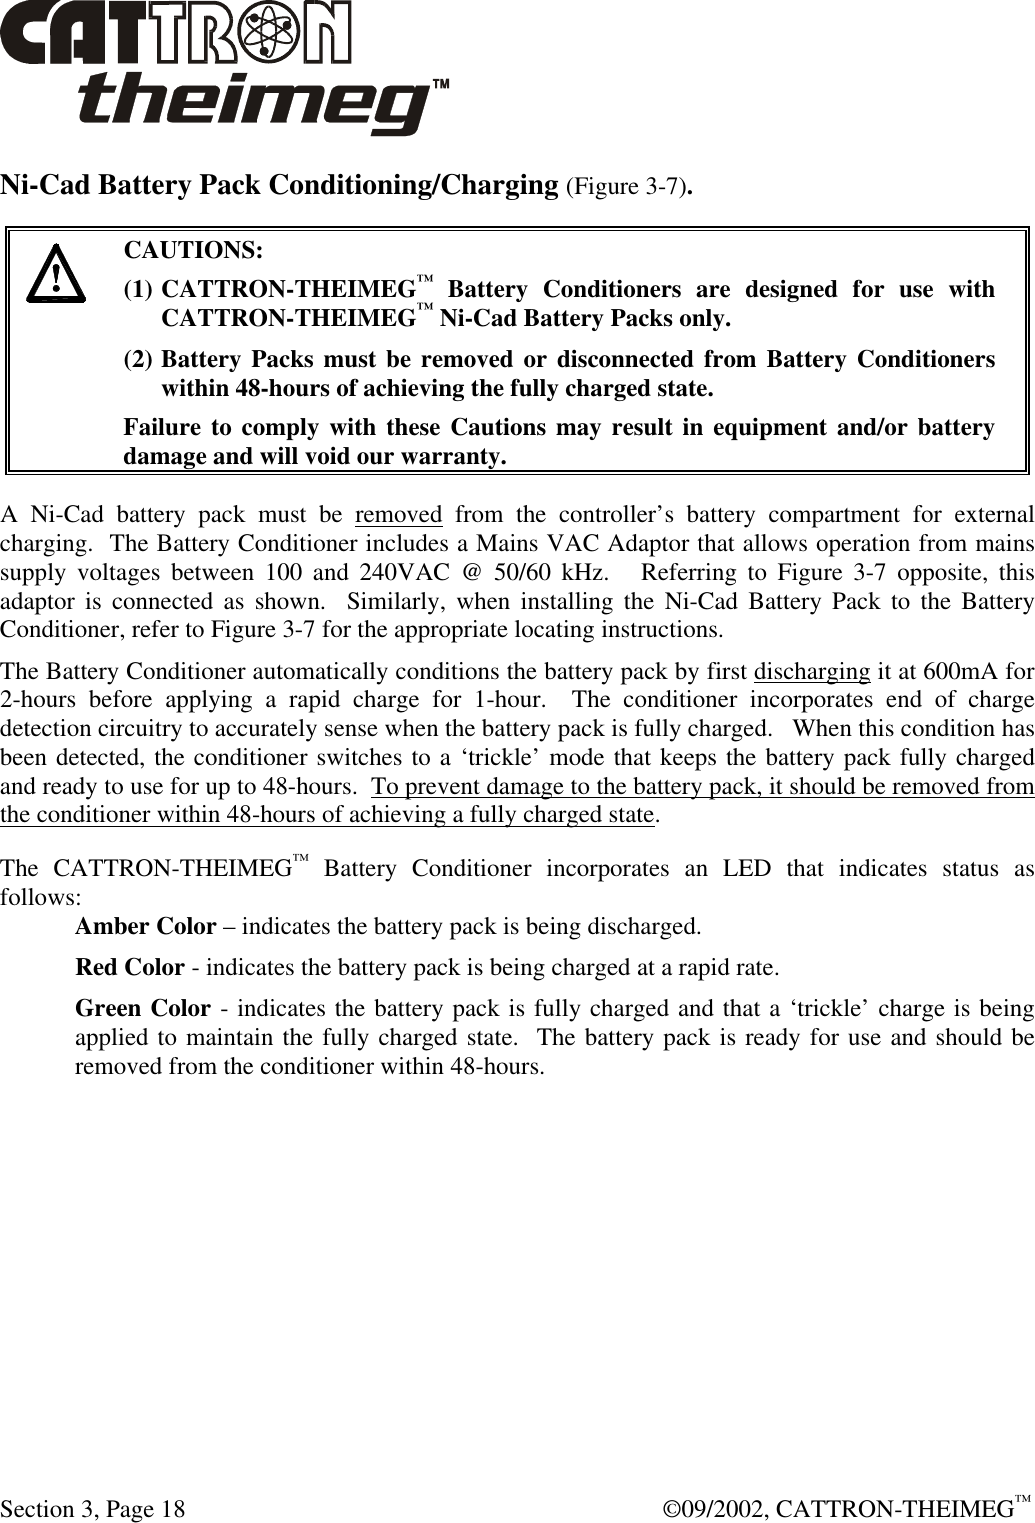  Section 3, Page 18  ©09/2002, CATTRON-THEIMEG™ Ni-Cad Battery Pack Conditioning/Charging (Figure 3-7).   CAUTIONS: (1) CATTRON-THEIMEG™ Battery Conditioners are designed for use with CATTRON-THEIMEG™ Ni-Cad Battery Packs only.   (2) Battery Packs must be removed or disconnected from Battery Conditioners within 48-hours of achieving the fully charged state.   Failure to comply with these Cautions may result in equipment and/or battery damage and will void our warranty.   A Ni-Cad battery pack must be removed from the controller’s battery compartment for external charging.  The Battery Conditioner includes a Mains VAC Adaptor that allows operation from mains supply voltages between 100 and 240VAC @ 50/60 kHz.   Referring to Figure 3-7 opposite, this adaptor is connected as shown.  Similarly, when installing the Ni-Cad Battery Pack to the Battery Conditioner, refer to Figure 3-7 for the appropriate locating instructions.  The Battery Conditioner automatically conditions the battery pack by first discharging it at 600mA for 2-hours before applying a rapid charge for 1-hour.  The conditioner incorporates end of charge detection circuitry to accurately sense when the battery pack is fully charged.   When this condition has been detected, the conditioner switches to a ‘trickle’ mode that keeps the battery pack fully charged and ready to use for up to 48-hours.  To prevent damage to the battery pack, it should be removed from the conditioner within 48-hours of achieving a fully charged state. The CATTRON-THEIMEG™ Battery Conditioner incorporates an LED that indicates status as follows: Amber Color – indicates the battery pack is being discharged. Red Color - indicates the battery pack is being charged at a rapid rate. Green Color - indicates the battery pack is fully charged and that a ‘trickle’ charge is being applied to maintain the fully charged state.  The battery pack is ready for use and should be removed from the conditioner within 48-hours. 